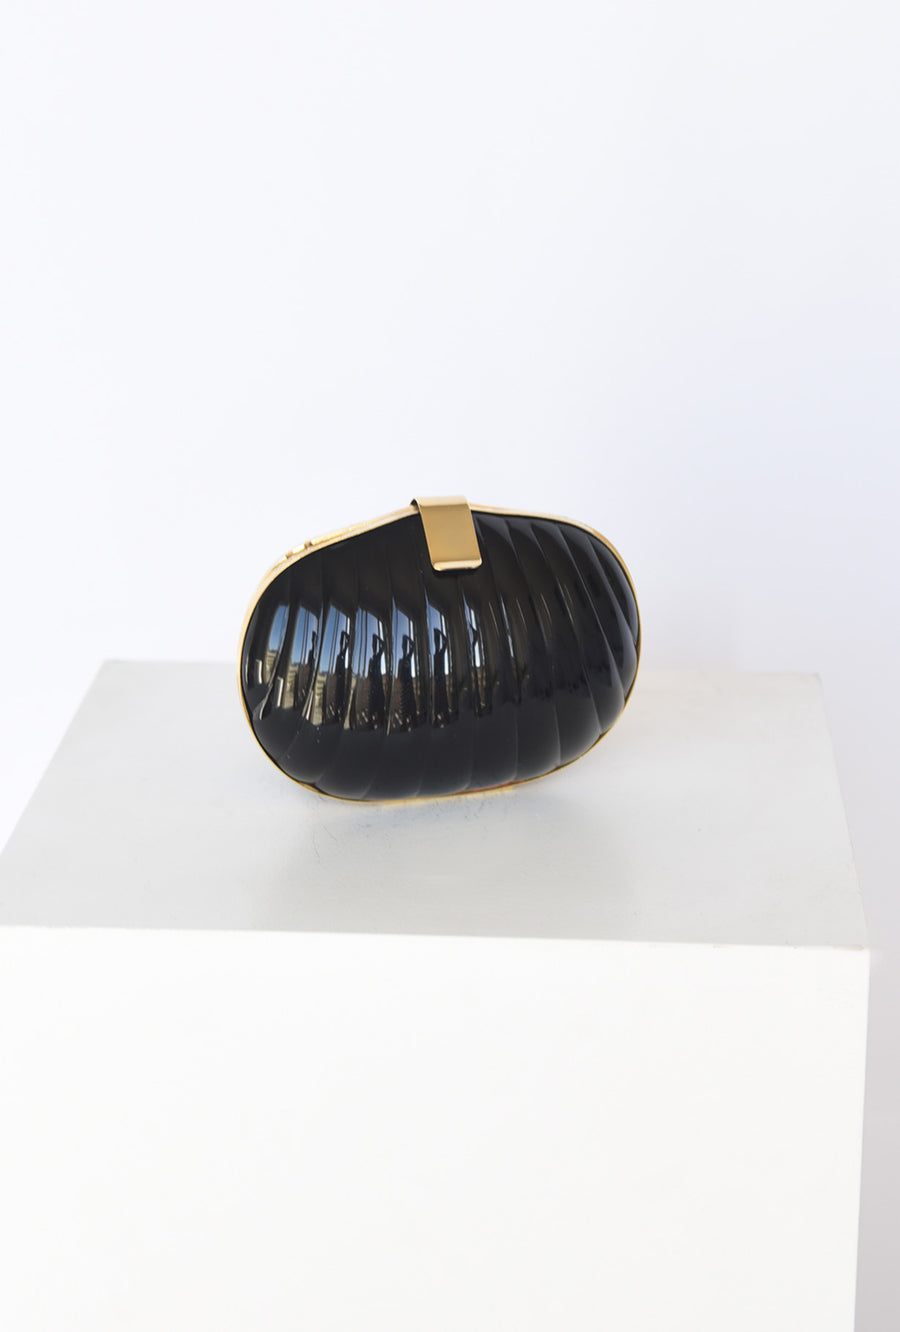 Vintage Deco Shell Clutch